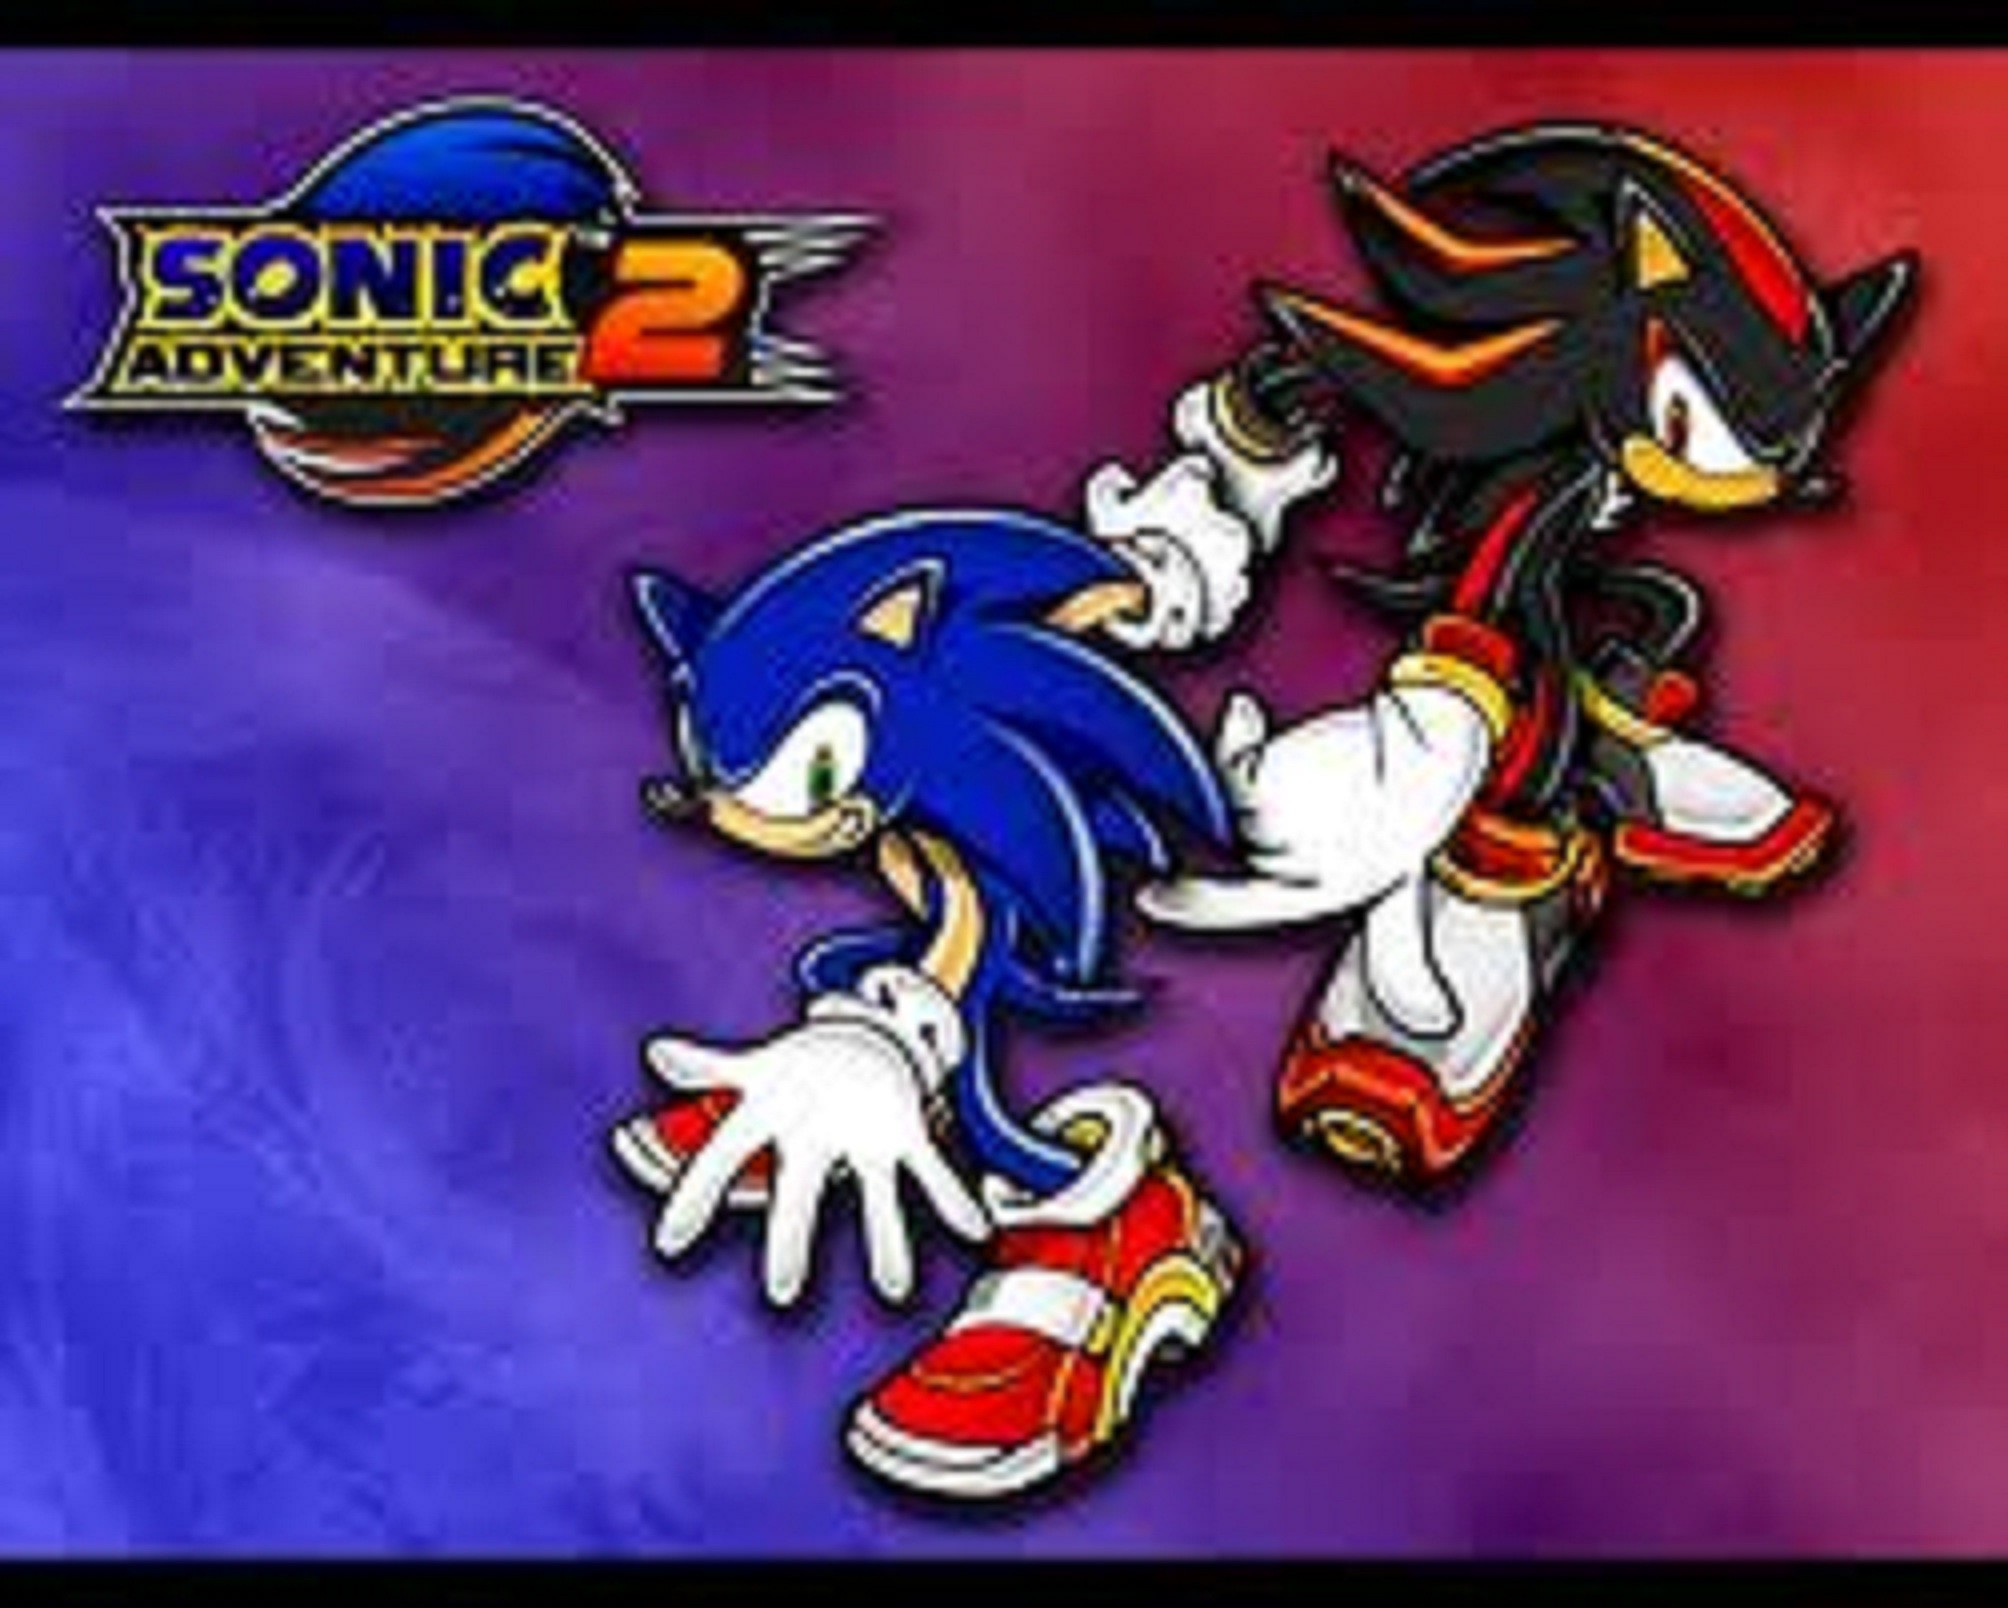 2008x1608 The Sonic, MLP, and Alpha and Omega Club images Sonic Adventure 2 Battle  Wallpaper HD wallpaper and background photos